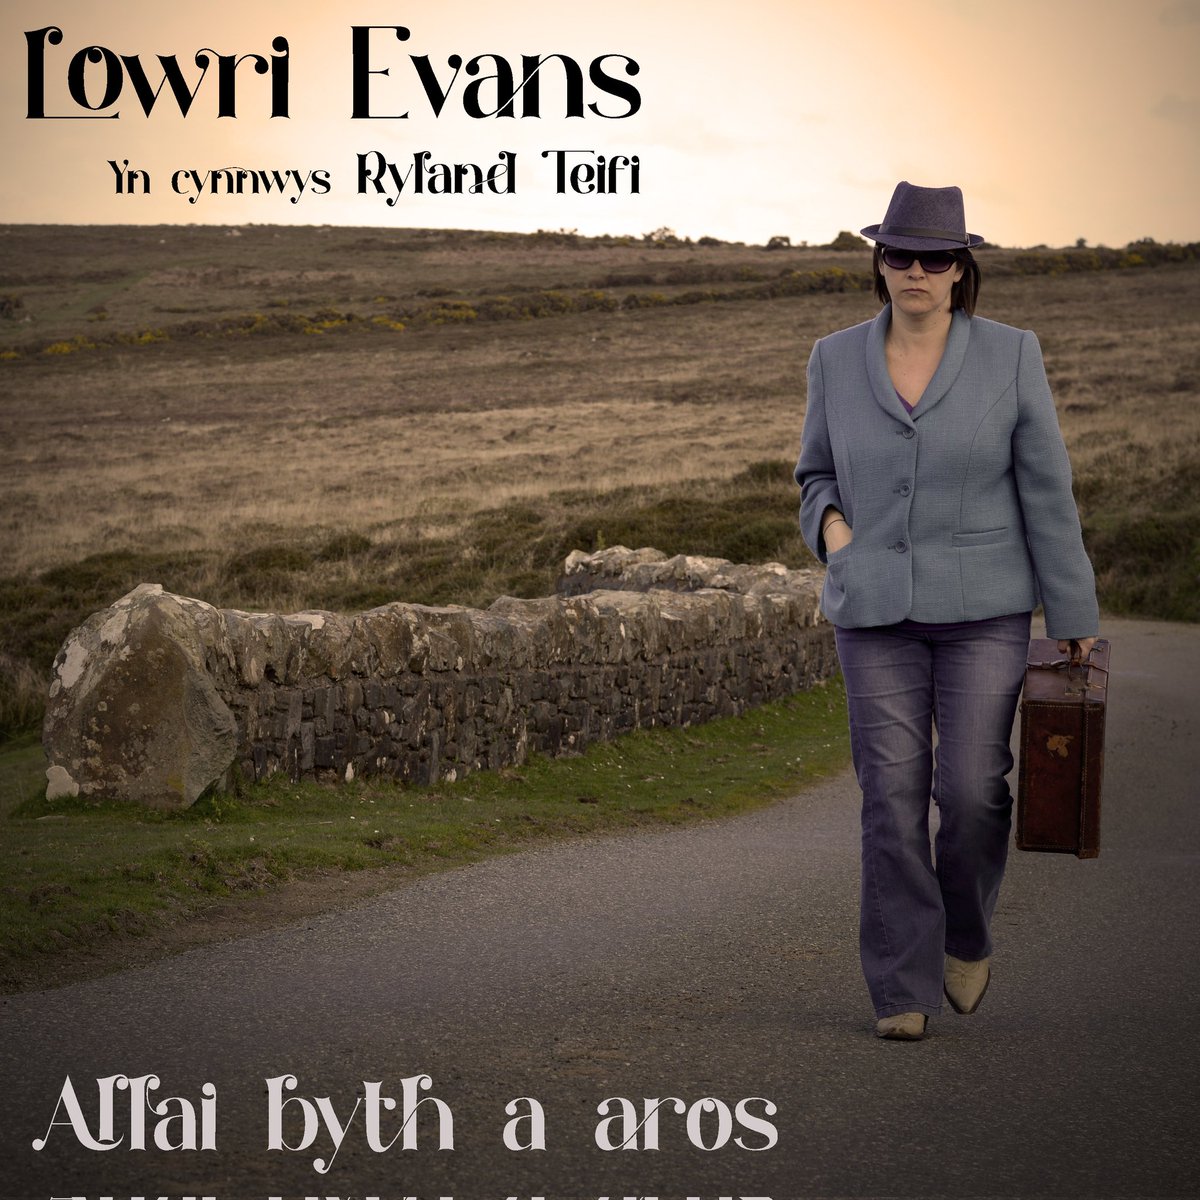 The last single from the new EP to be released on 17th May...country duet with the fantastic @RylandTeifi can't wait for you to hear this one! @adamwalton @BronwenLewis_ @WhisperingBob @Folk_ontheFarm @DaveBall70 @CountryBellesUK @TheAMAUK @